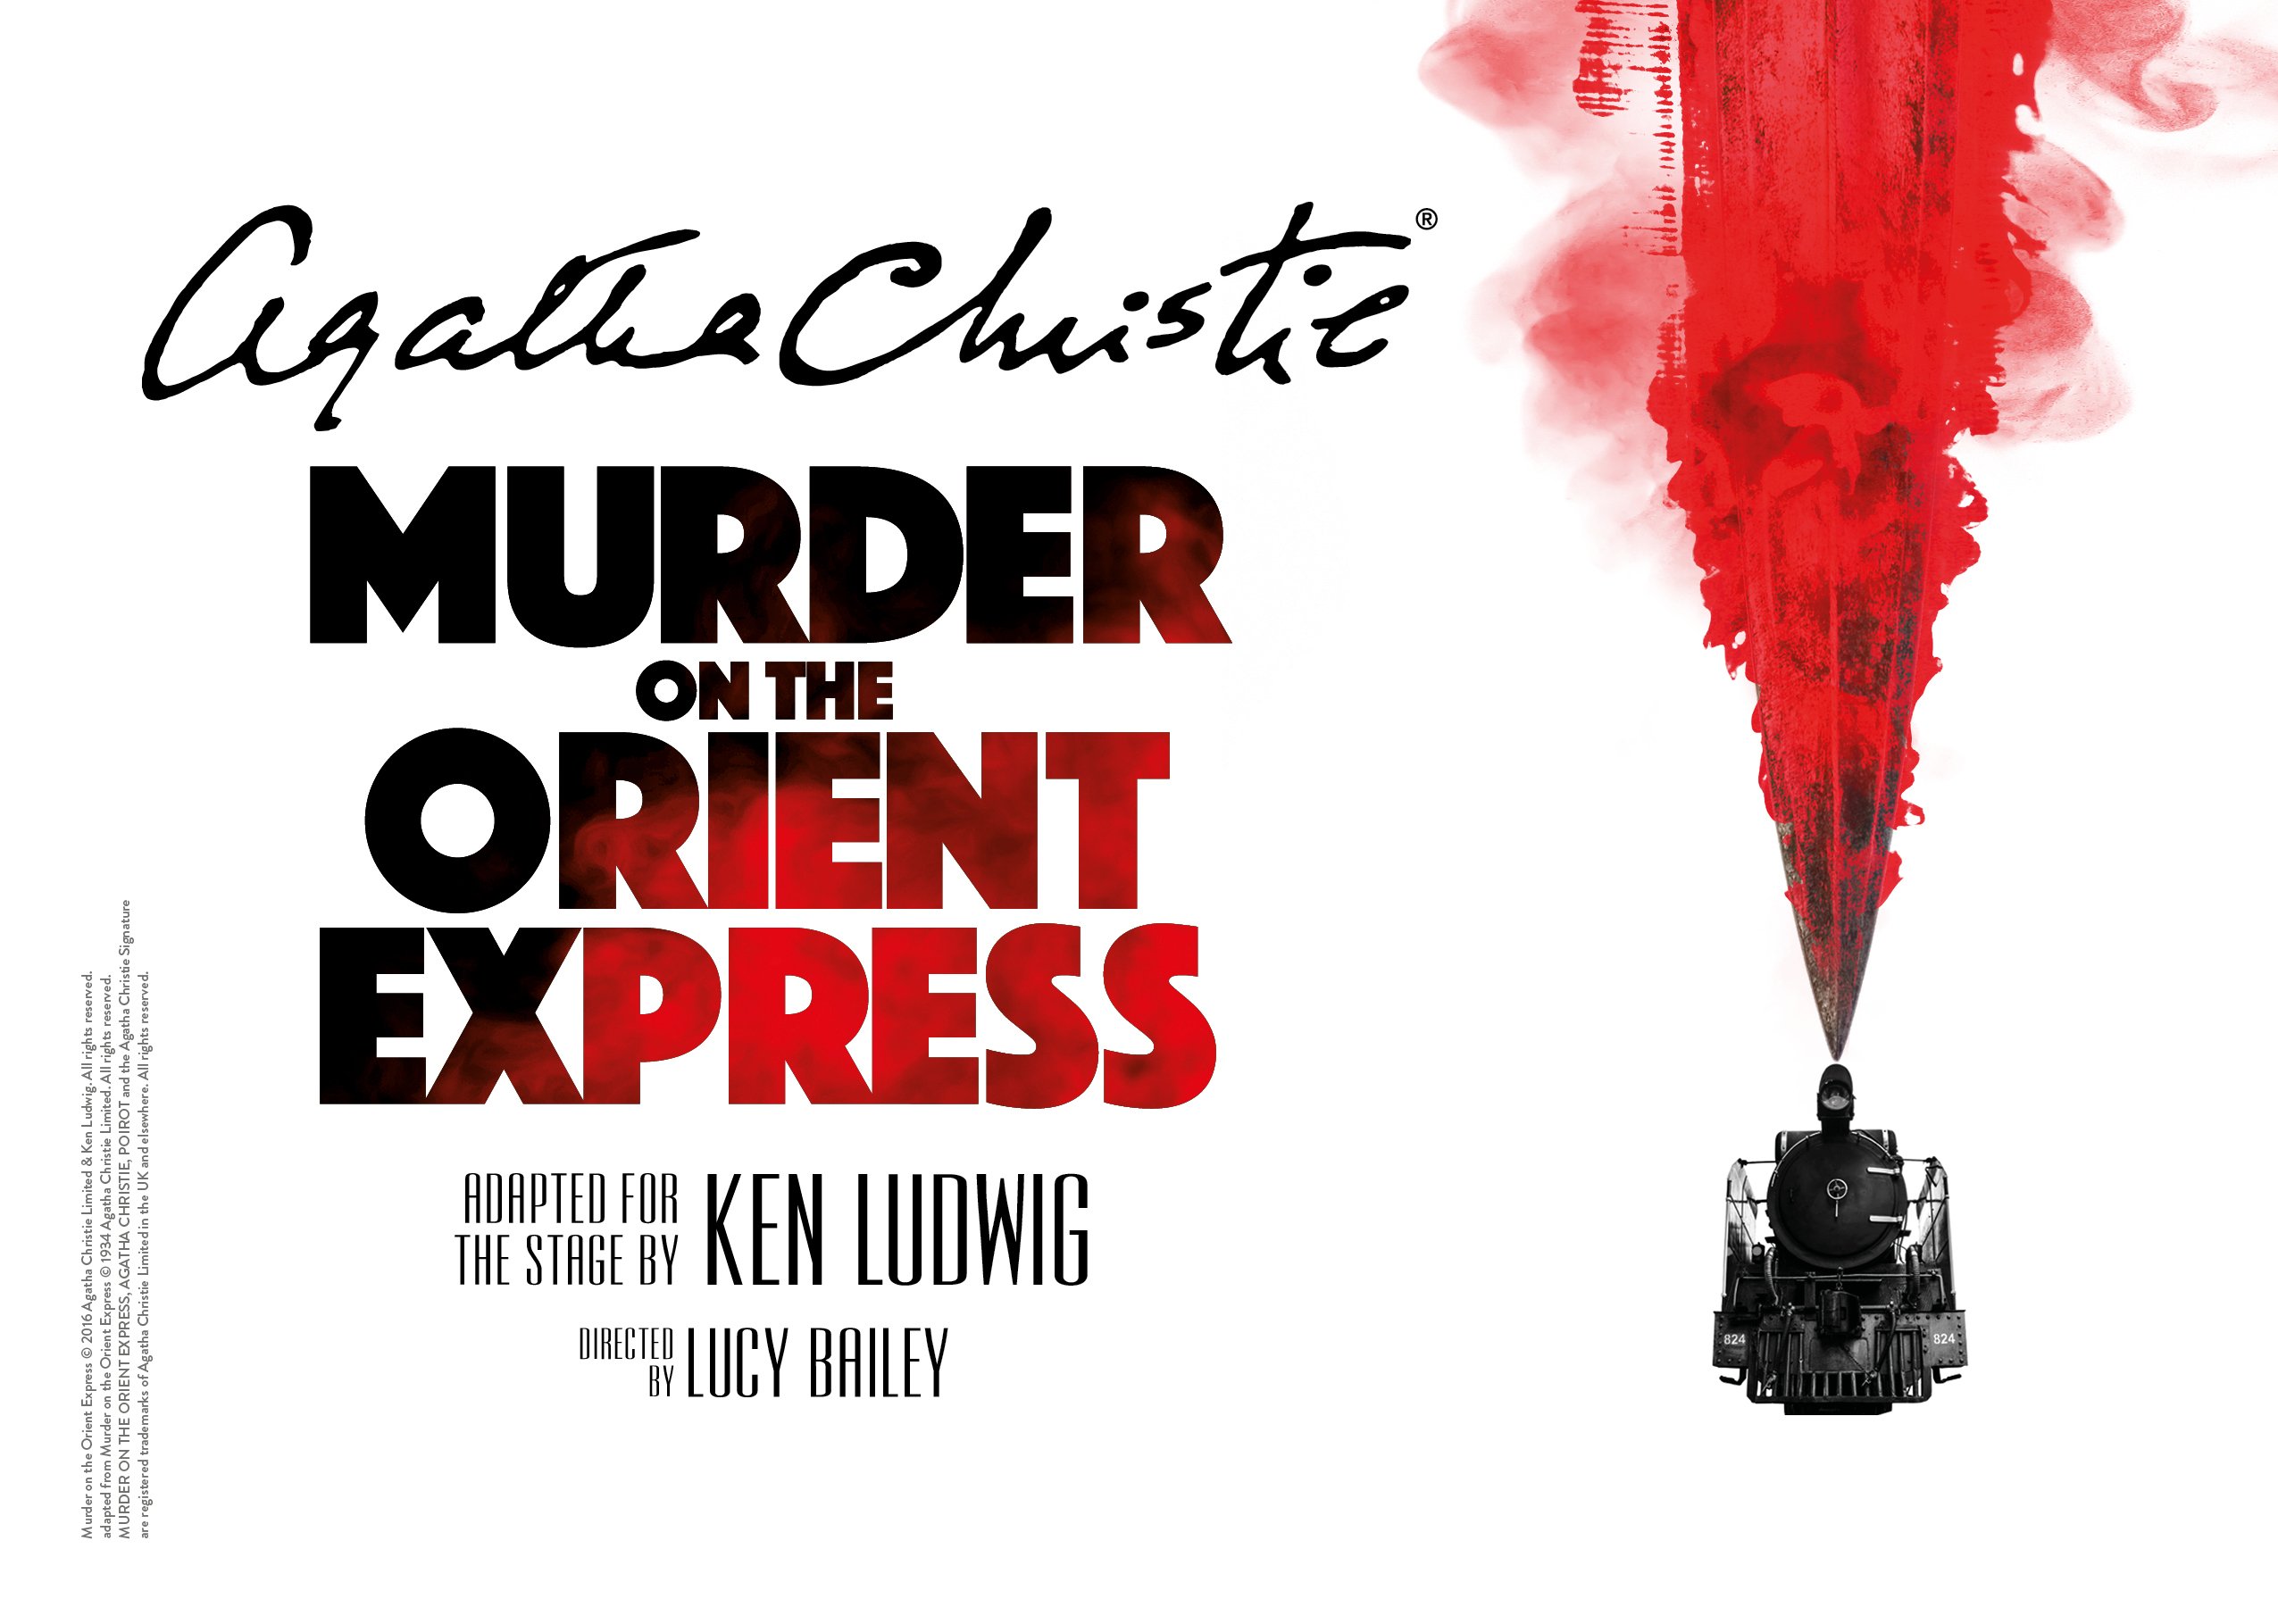 Murder on the Orient Express Top Image